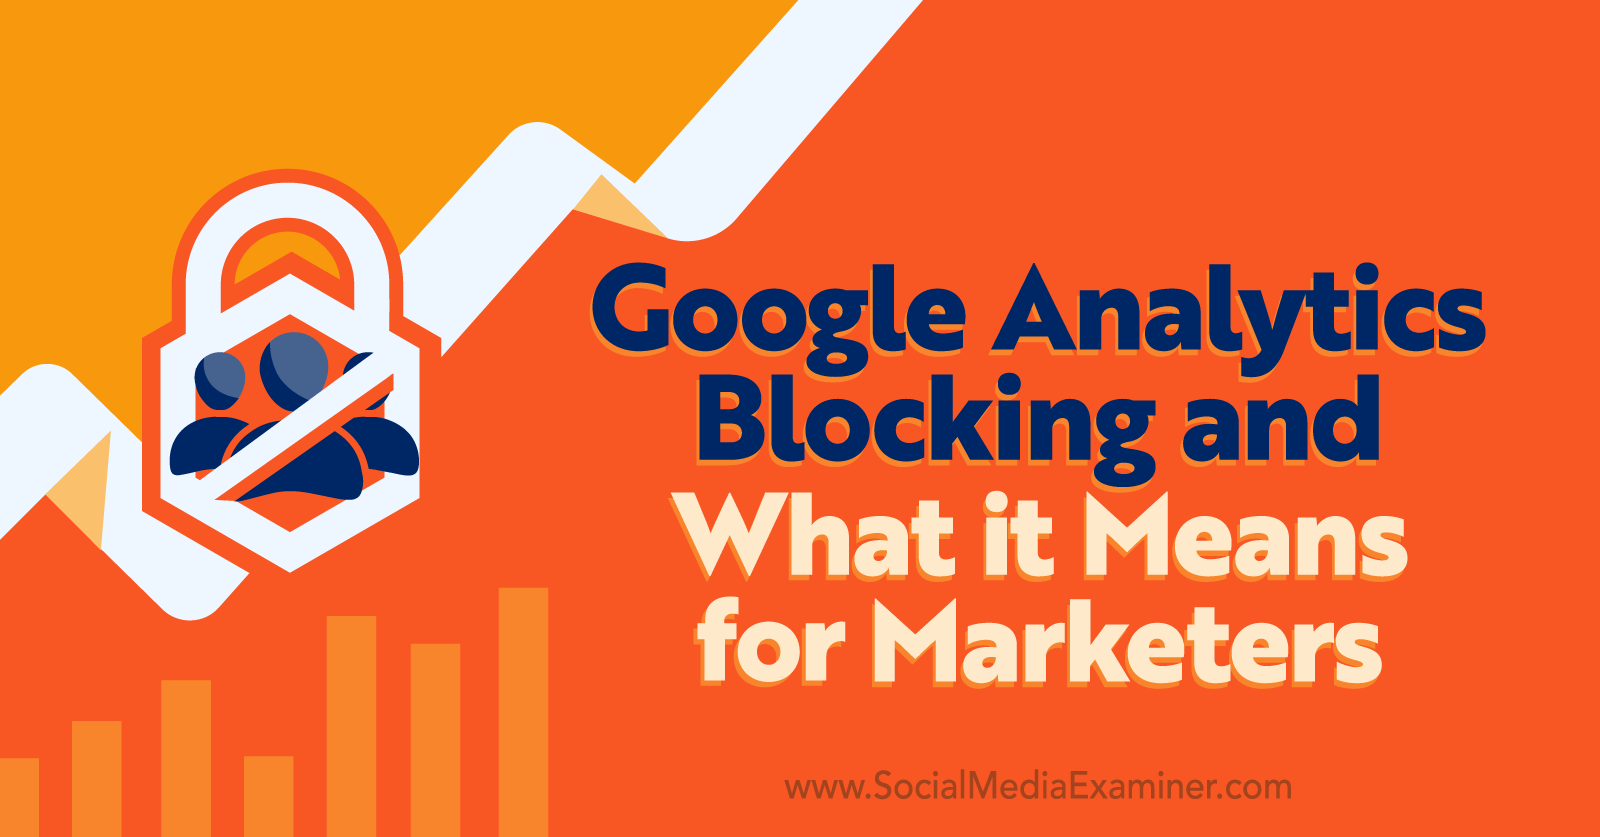 Google Analytics Blocking and What It Means for Marketers by Michael Stelzner